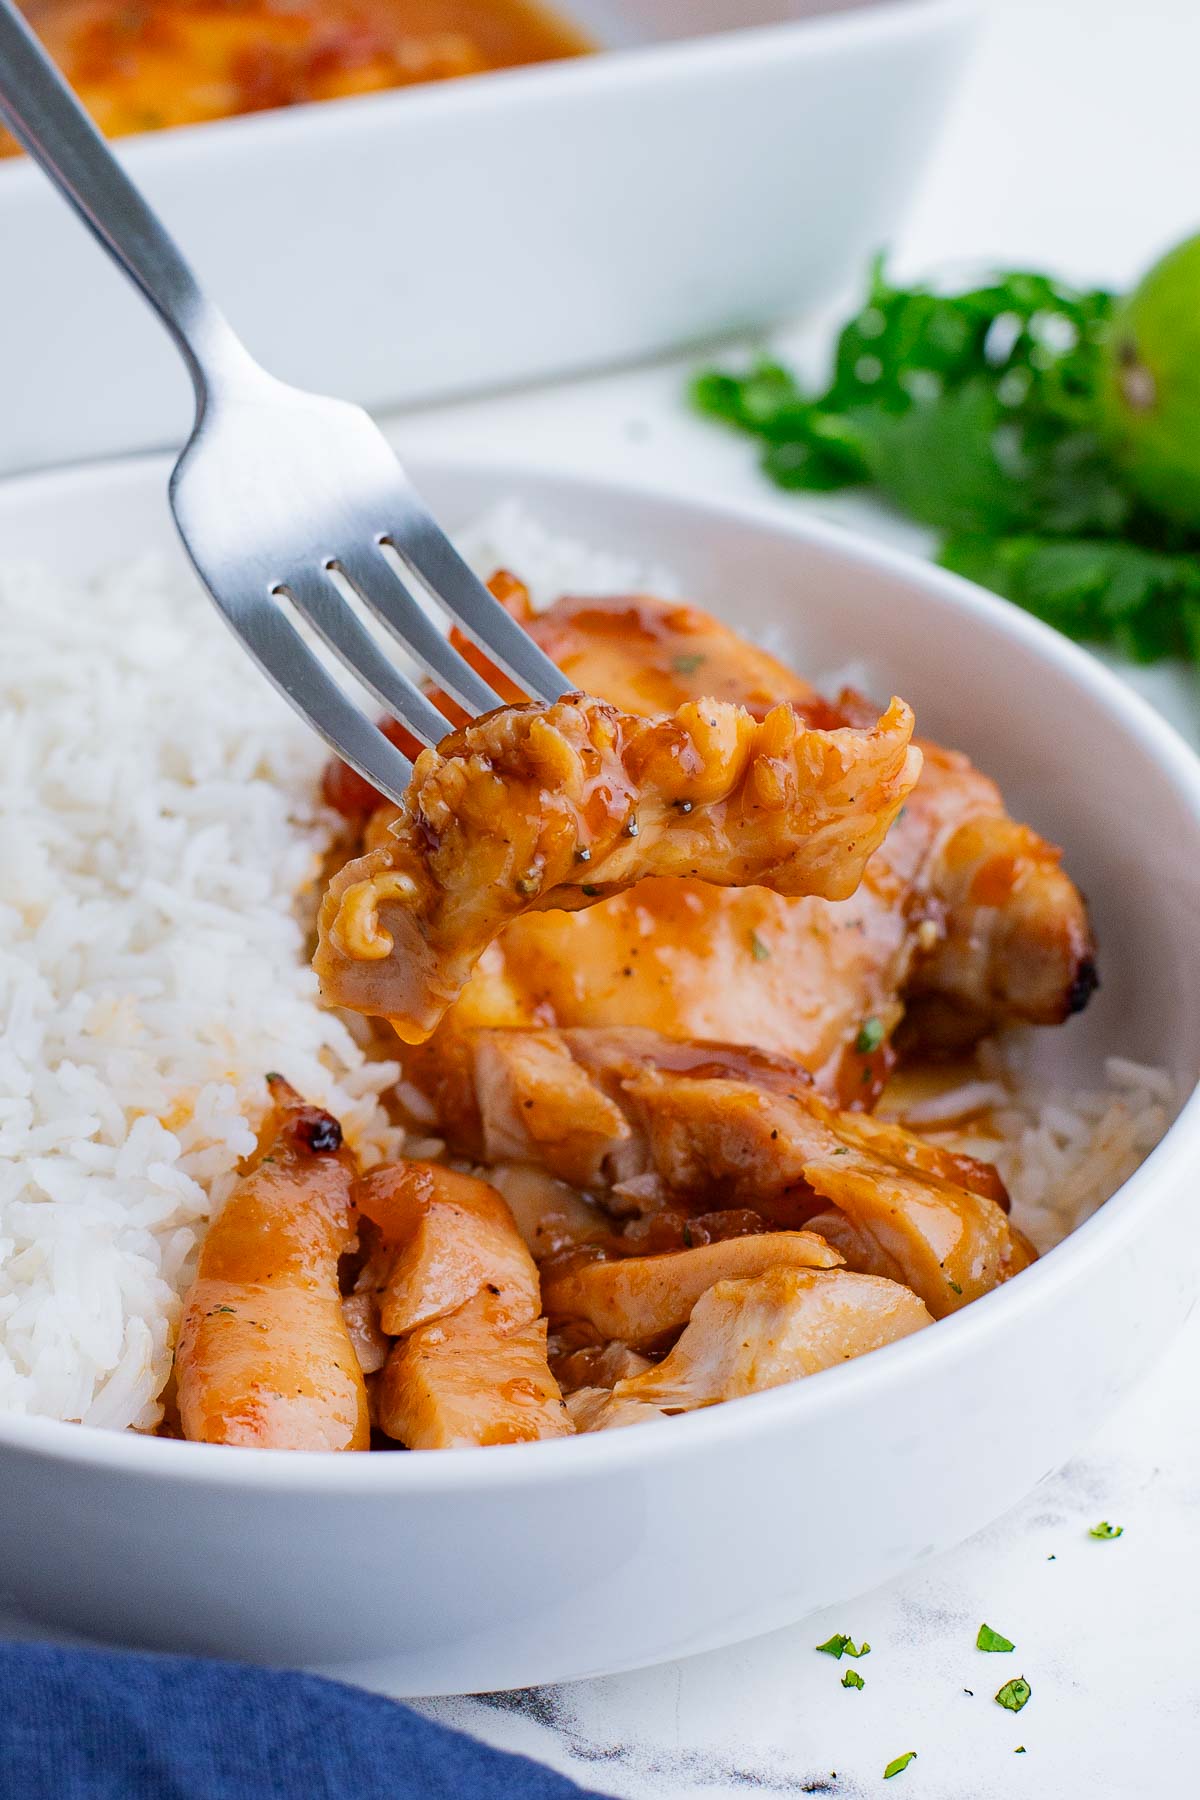 Apricot preserve chicken thighs are sliced and served in a white bowl with rice.